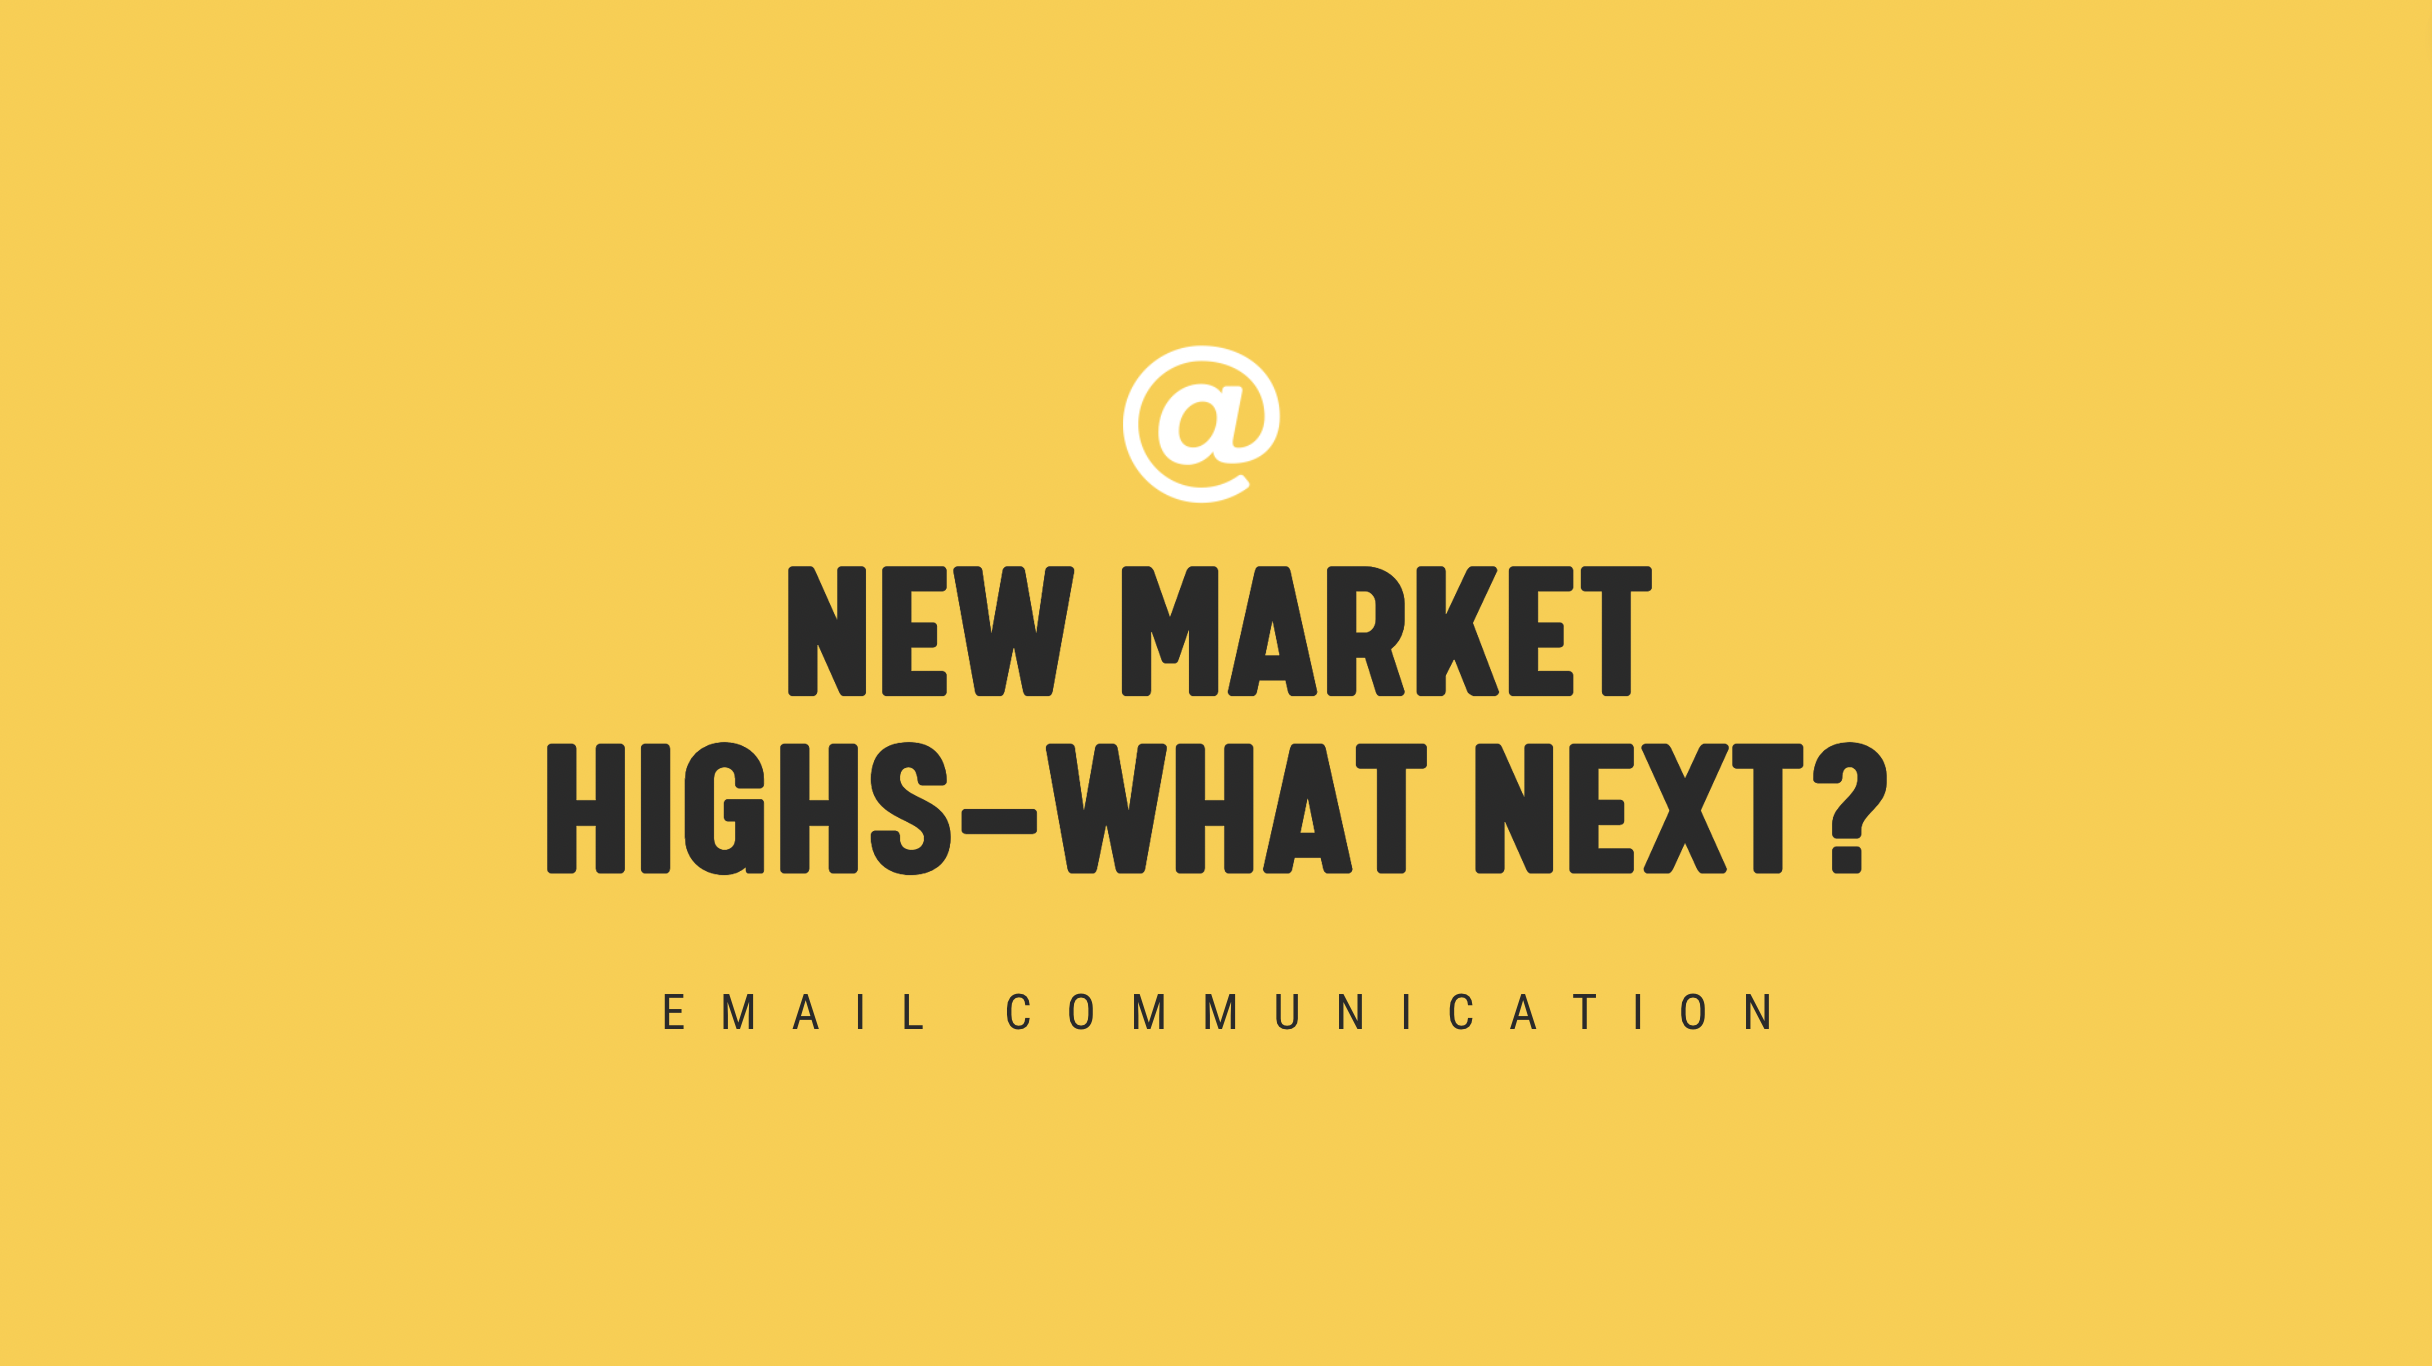 [NEW] New Market Highs—What Next? - Timely Email